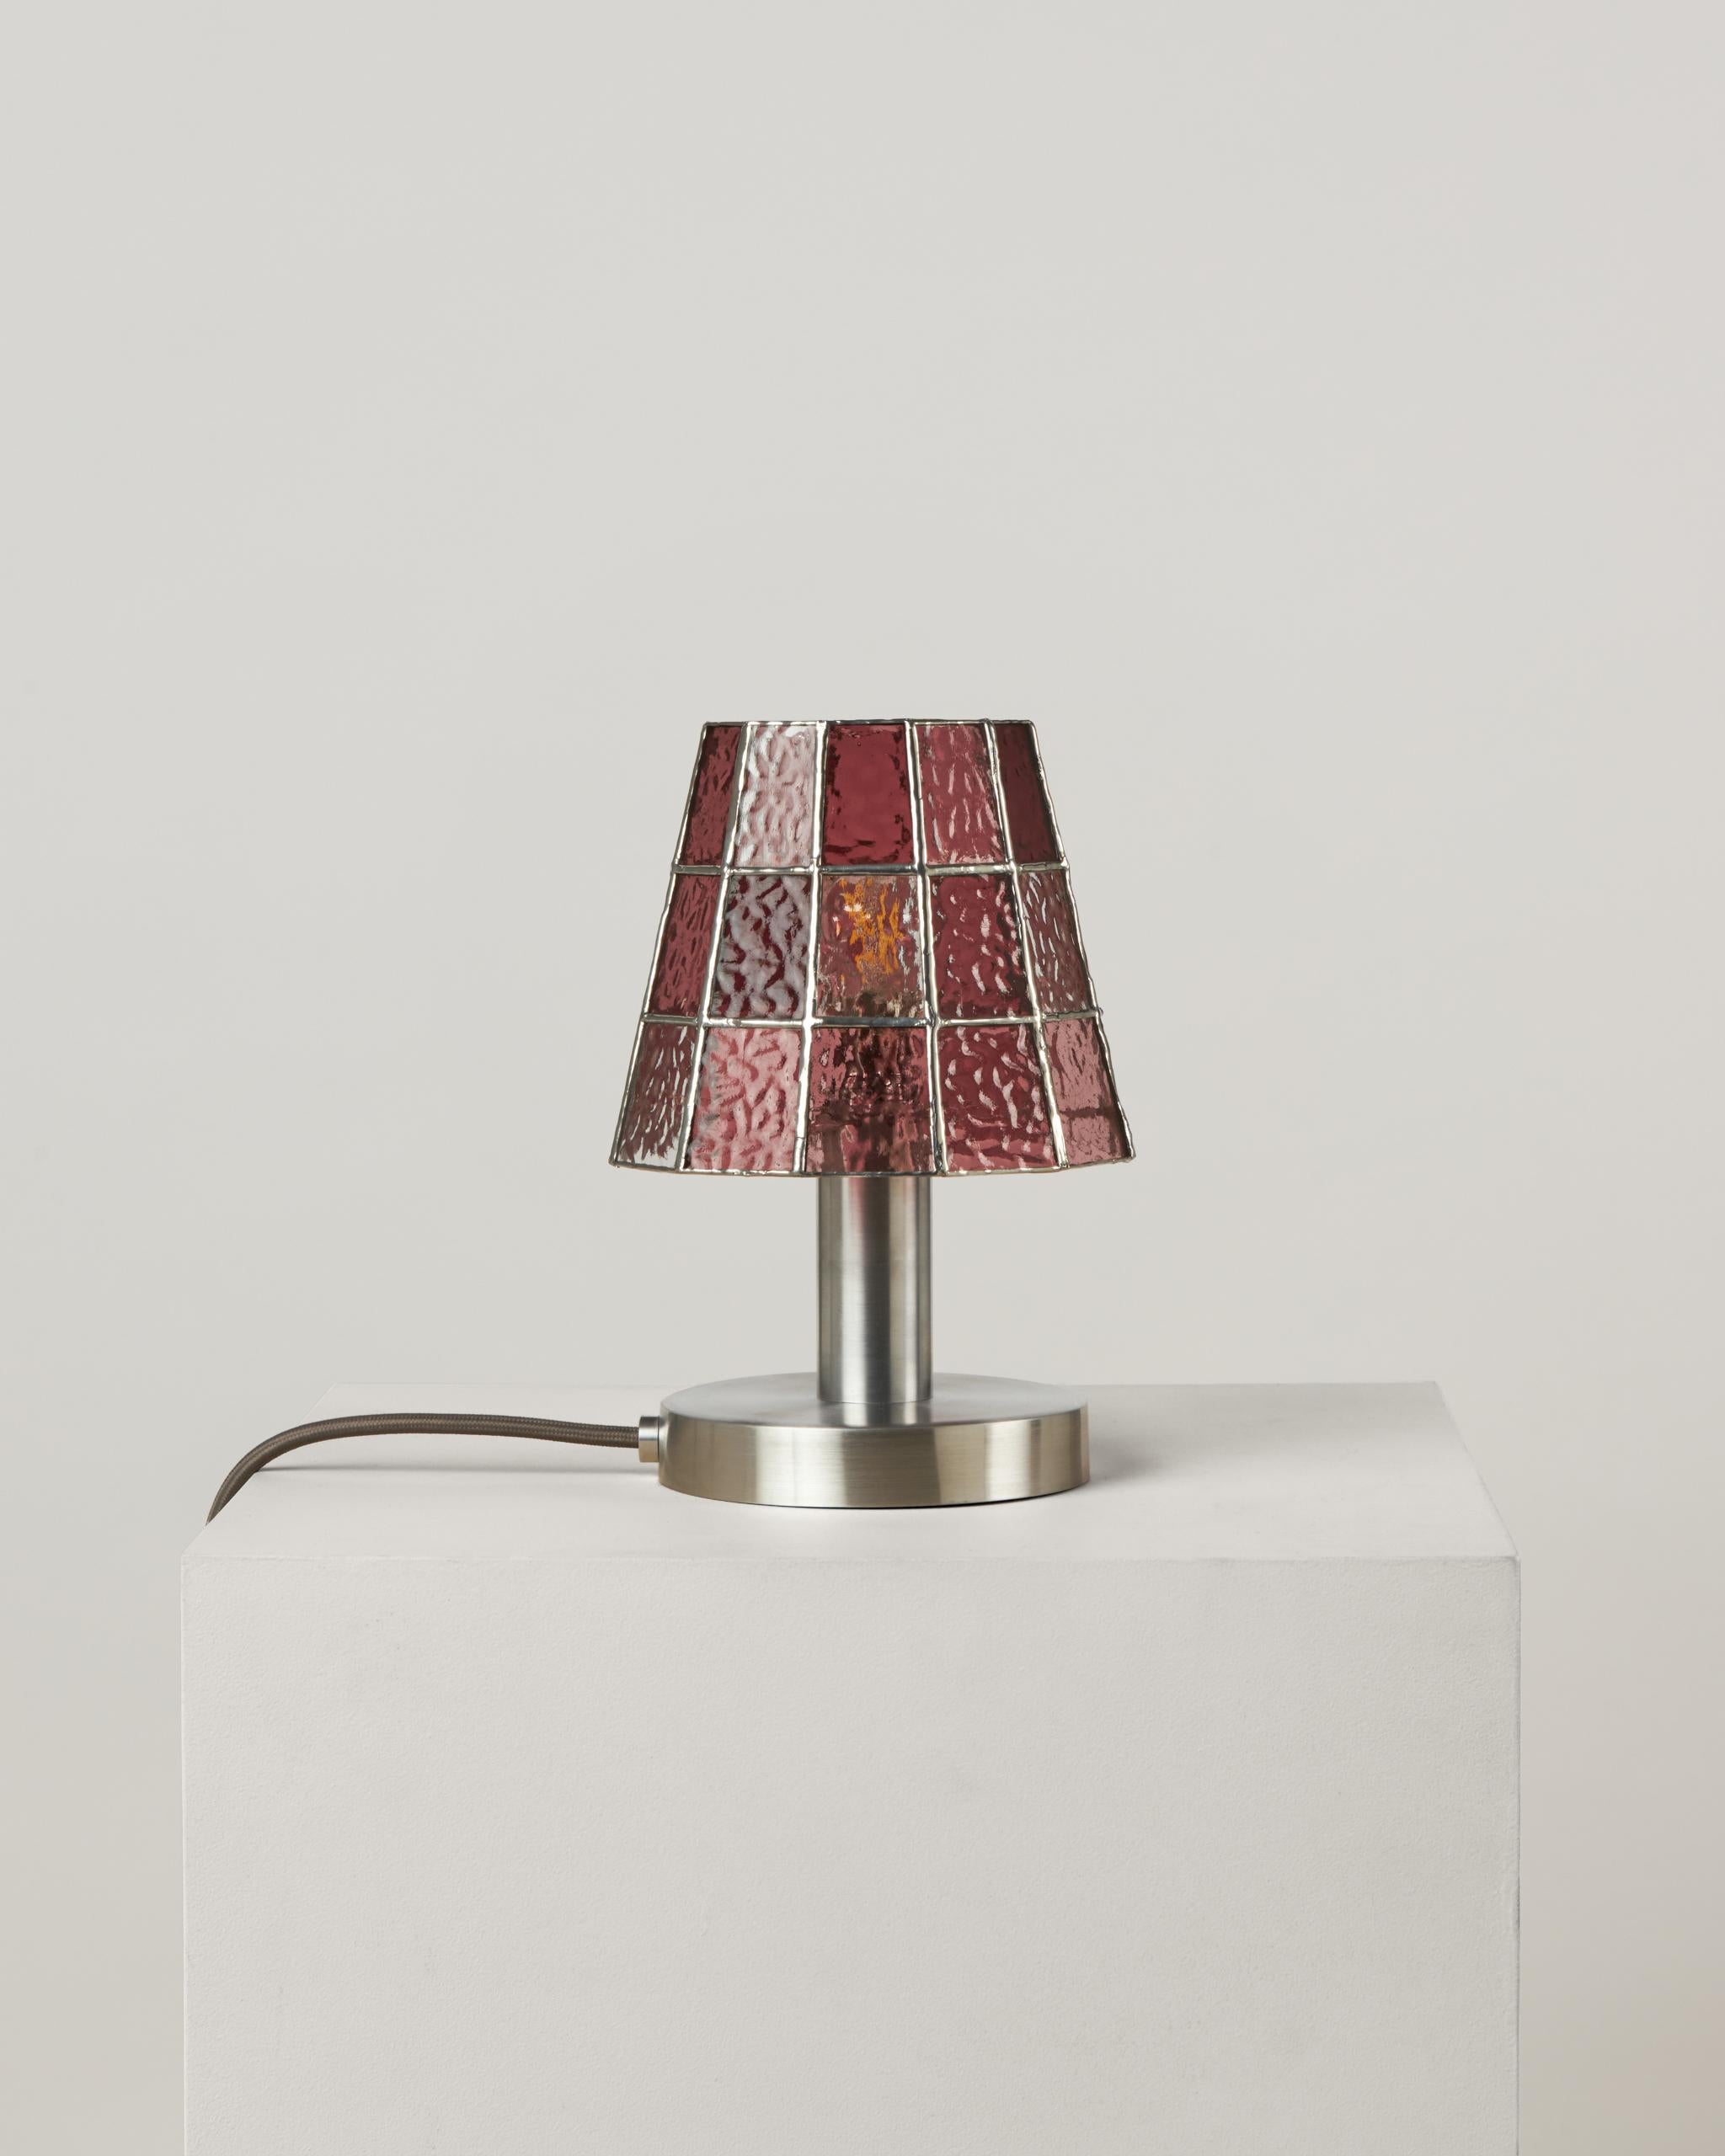 The Fun Guy table lamp is equal parts whimsy and grace. 

Drawing on the forms and luminescent coloring of wild mushrooms and fungi, a chunky aluminum base is capped with a handmade stained glass shade that surprises and delights with an ever